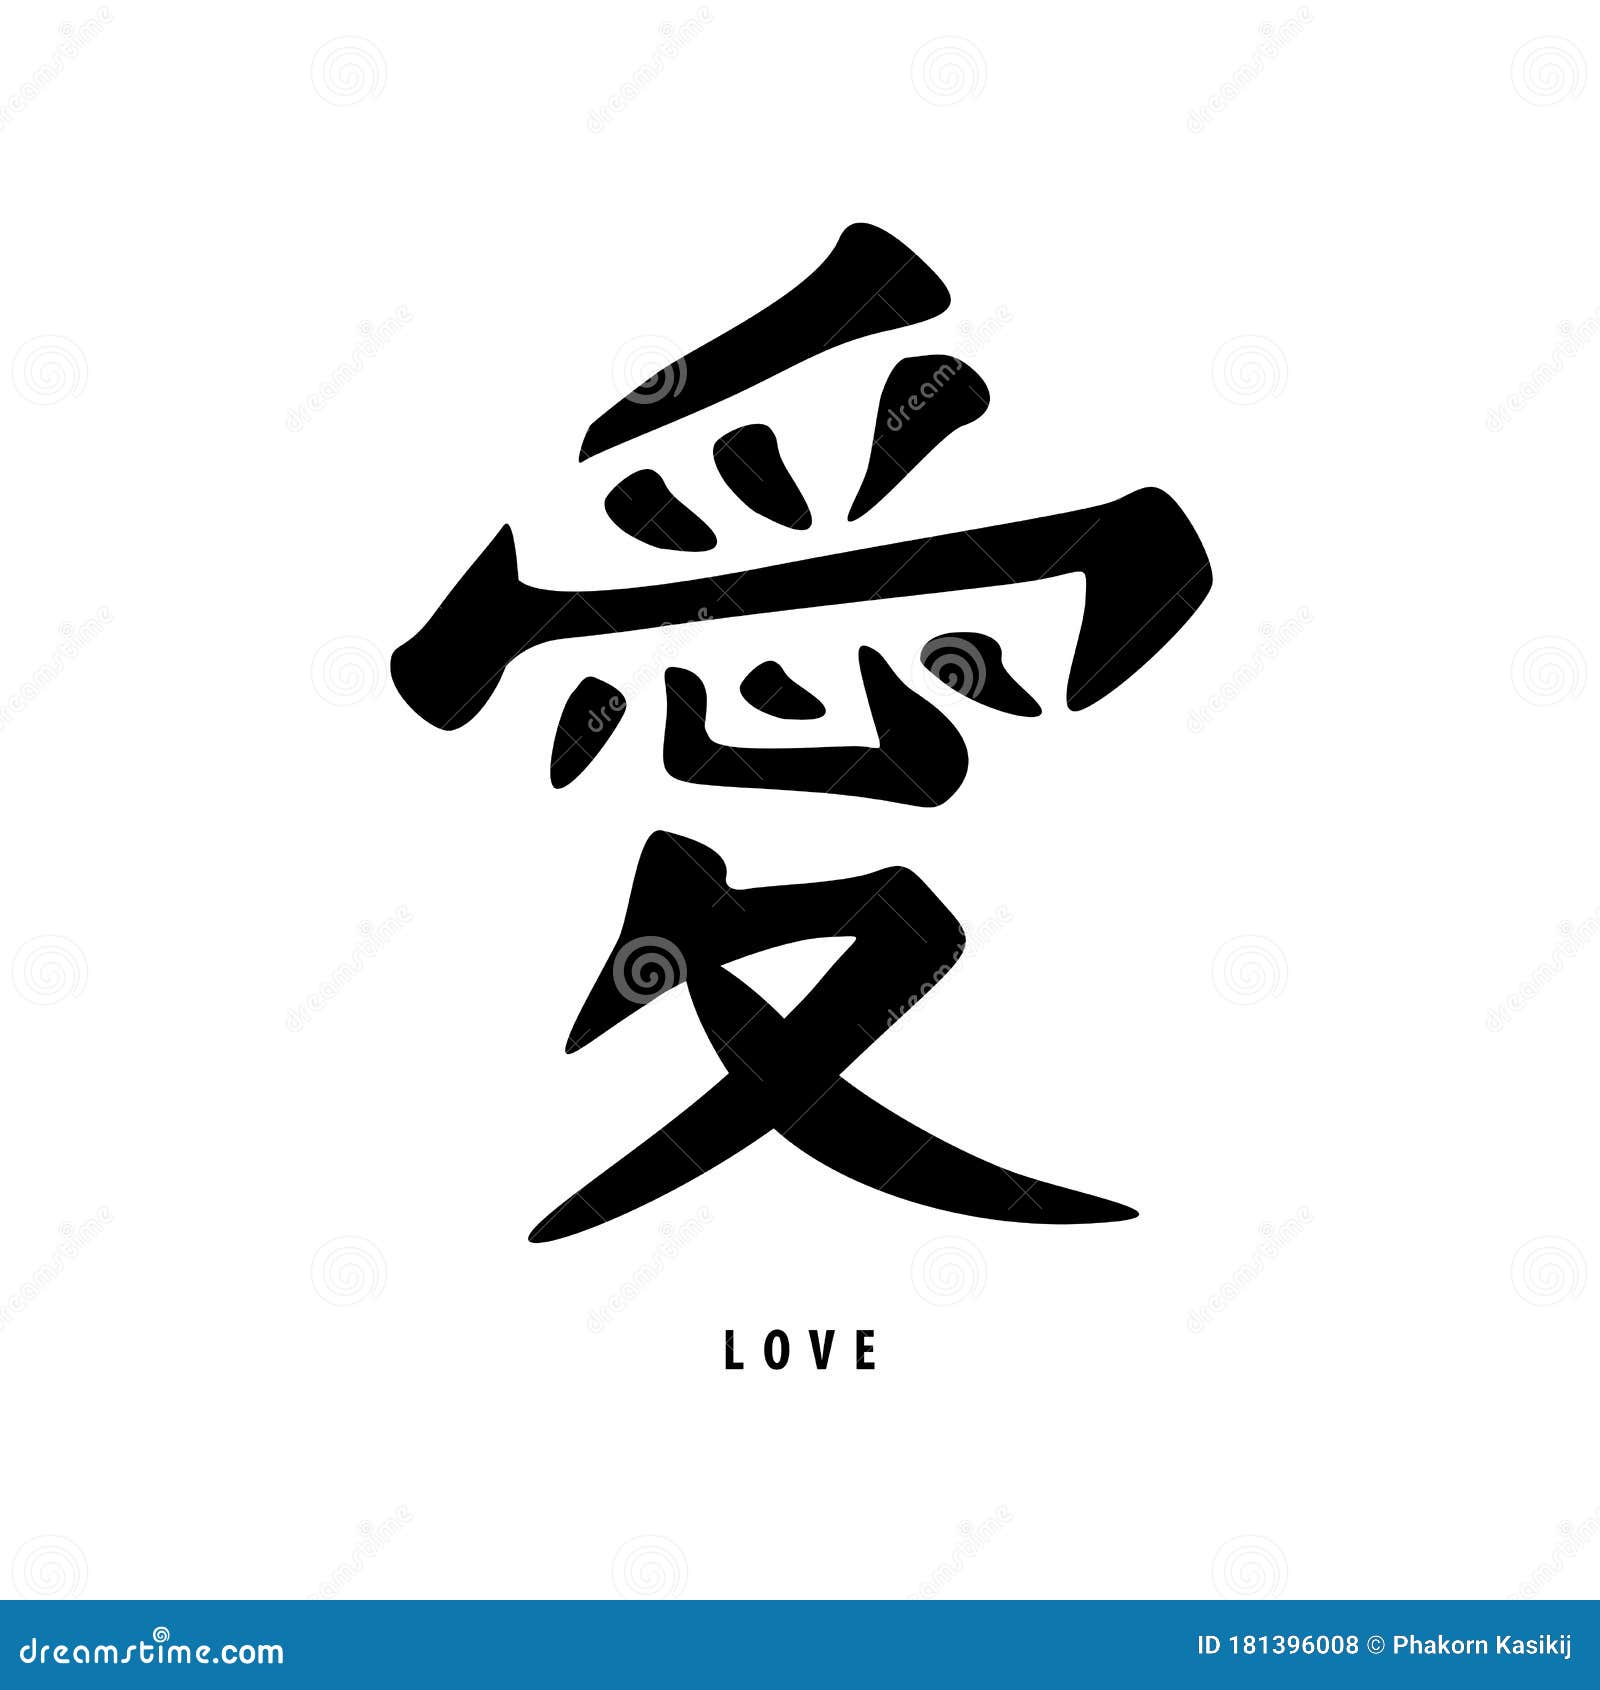 Romantic Traditional Ancient Love Calligraphy Letter Stock Vector ...